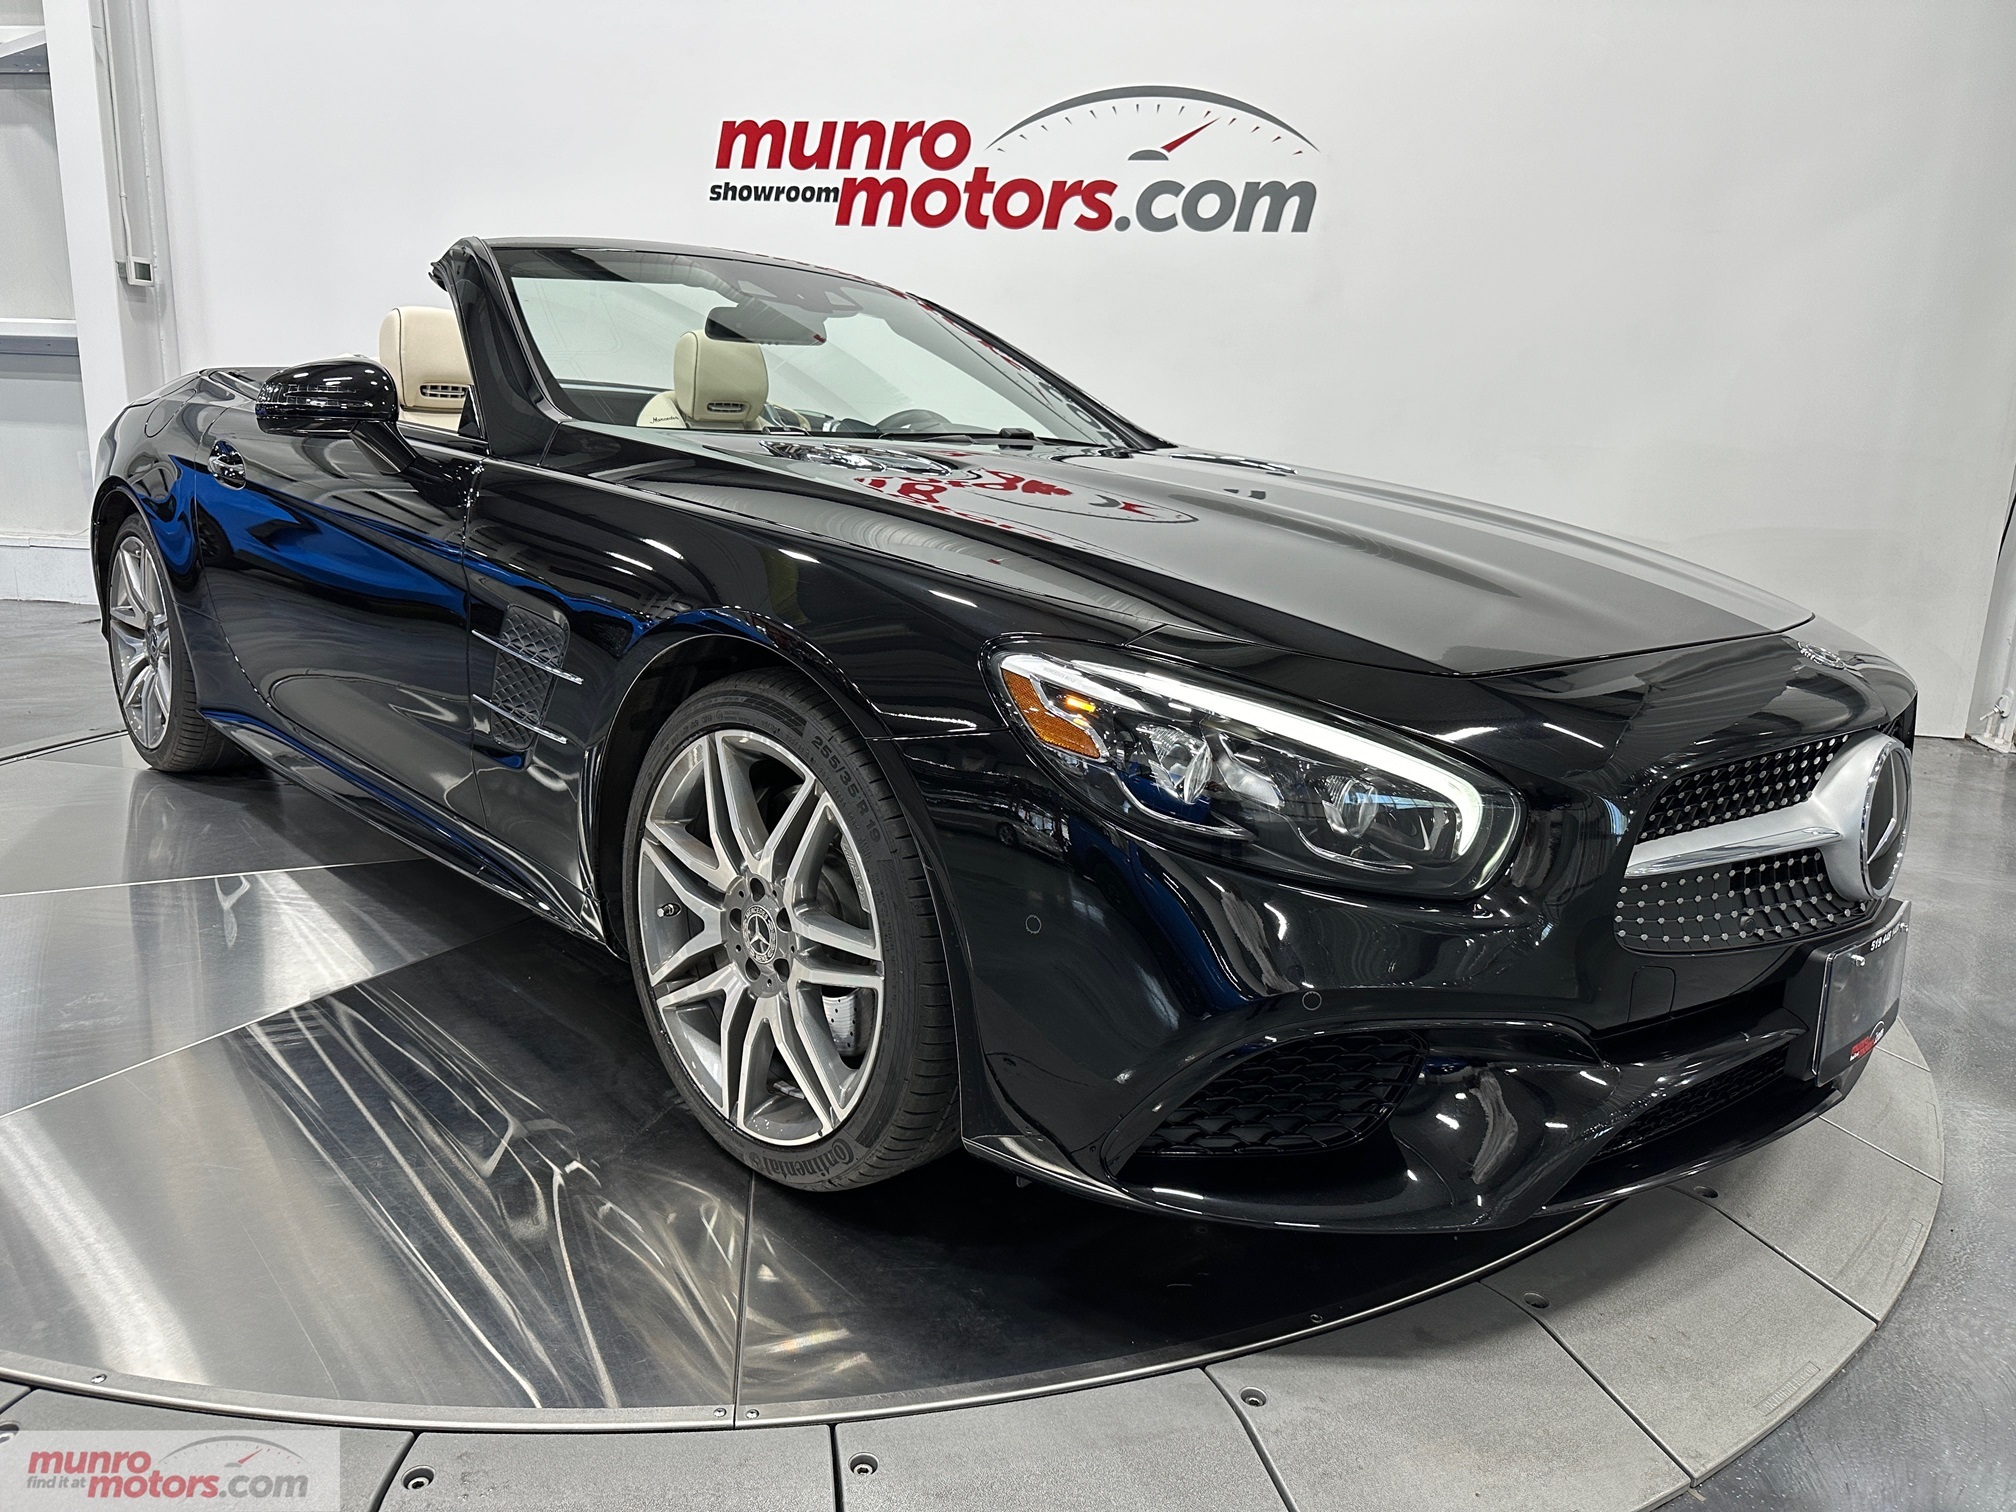 2019 Mercedes-Benz SL-Class SOLDSOLDSOLD550 Roadster Twin Turbo 4.7L V8